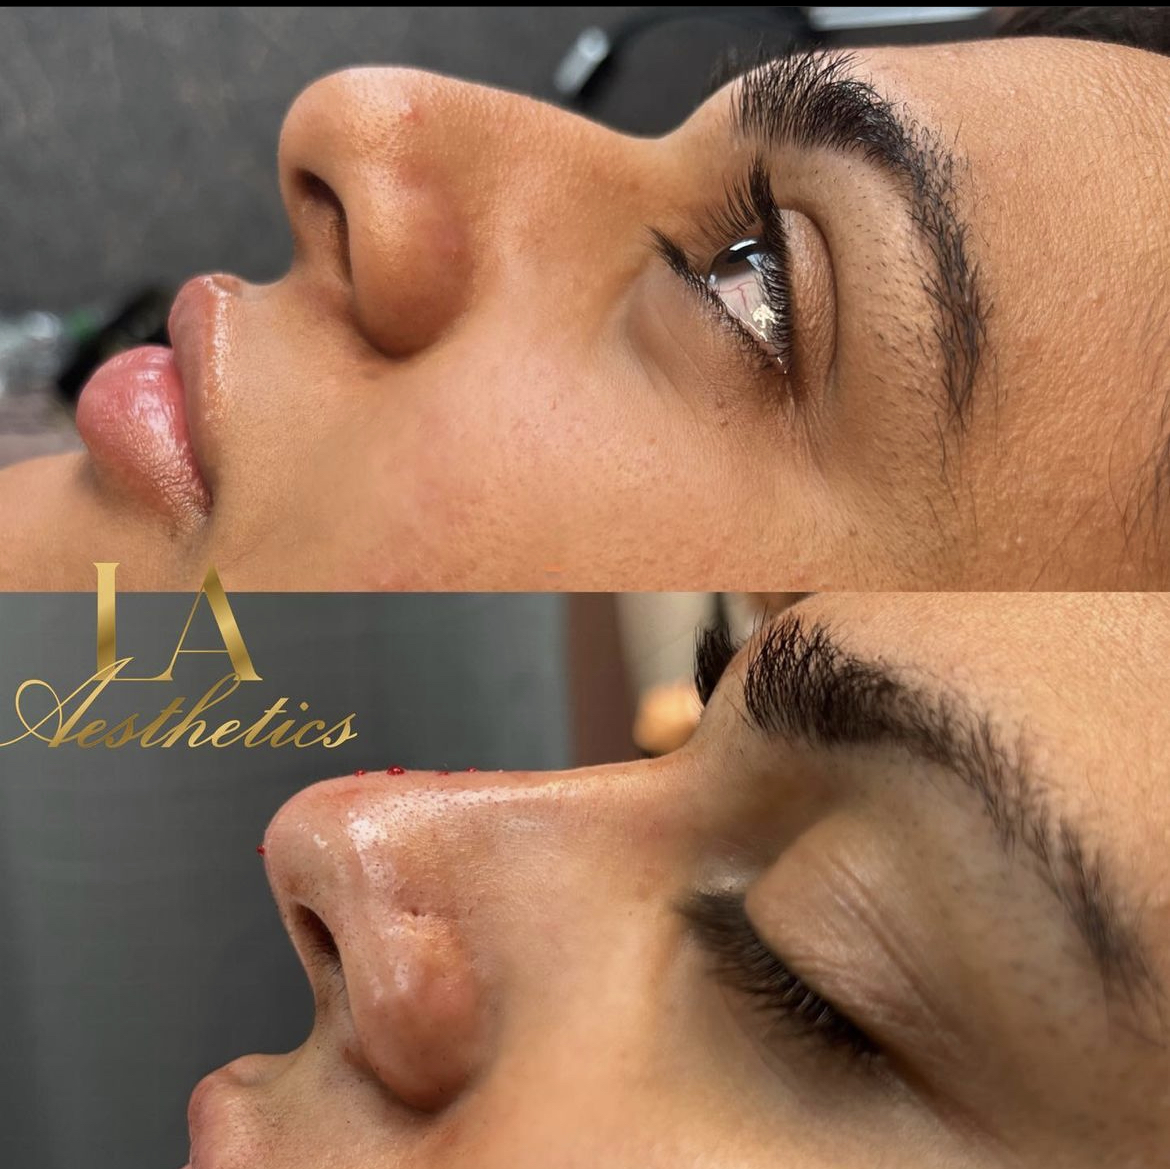 LA Aesthetics | Aesthetic Clinic & Cosmetic Courses In London gallery image 15